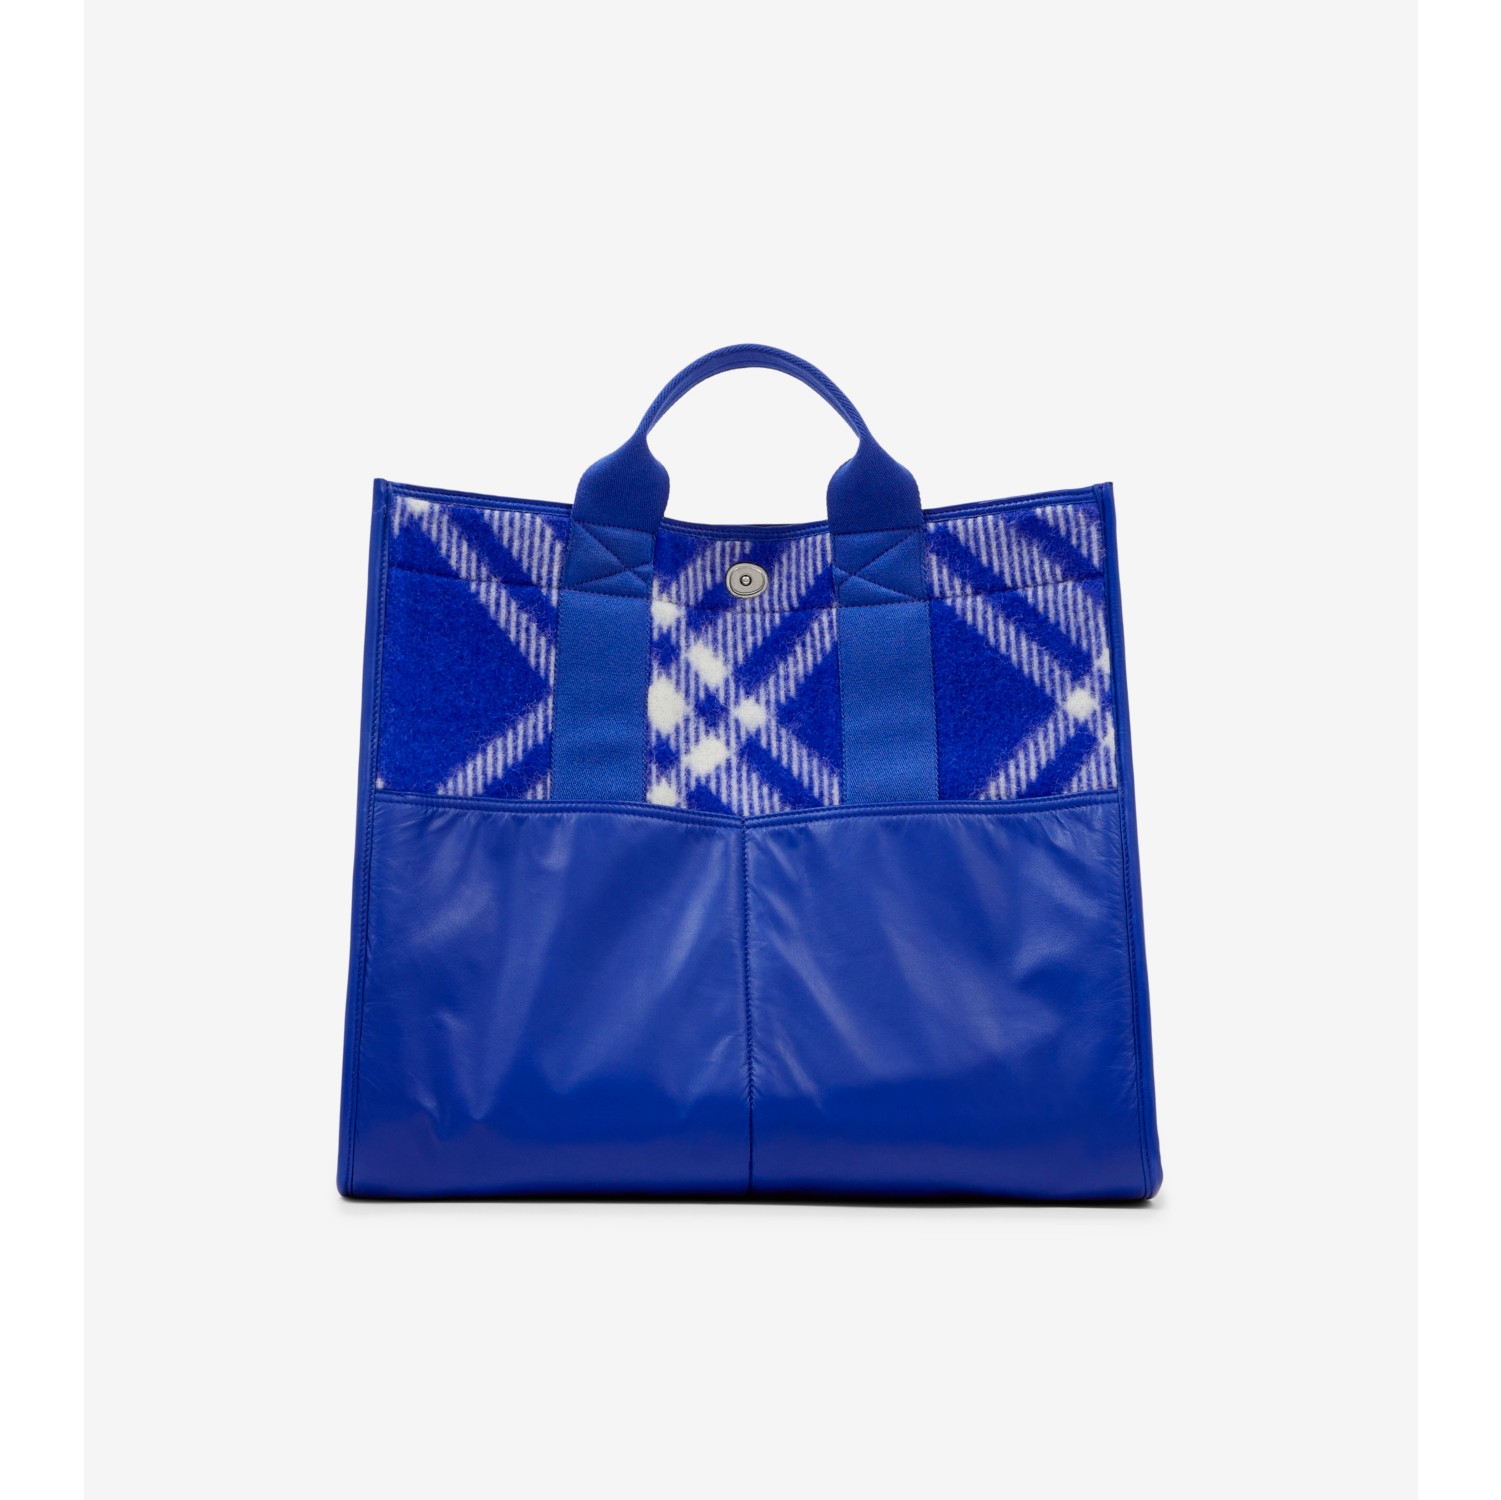 Extra Large Shopper Tote in Knight - Men